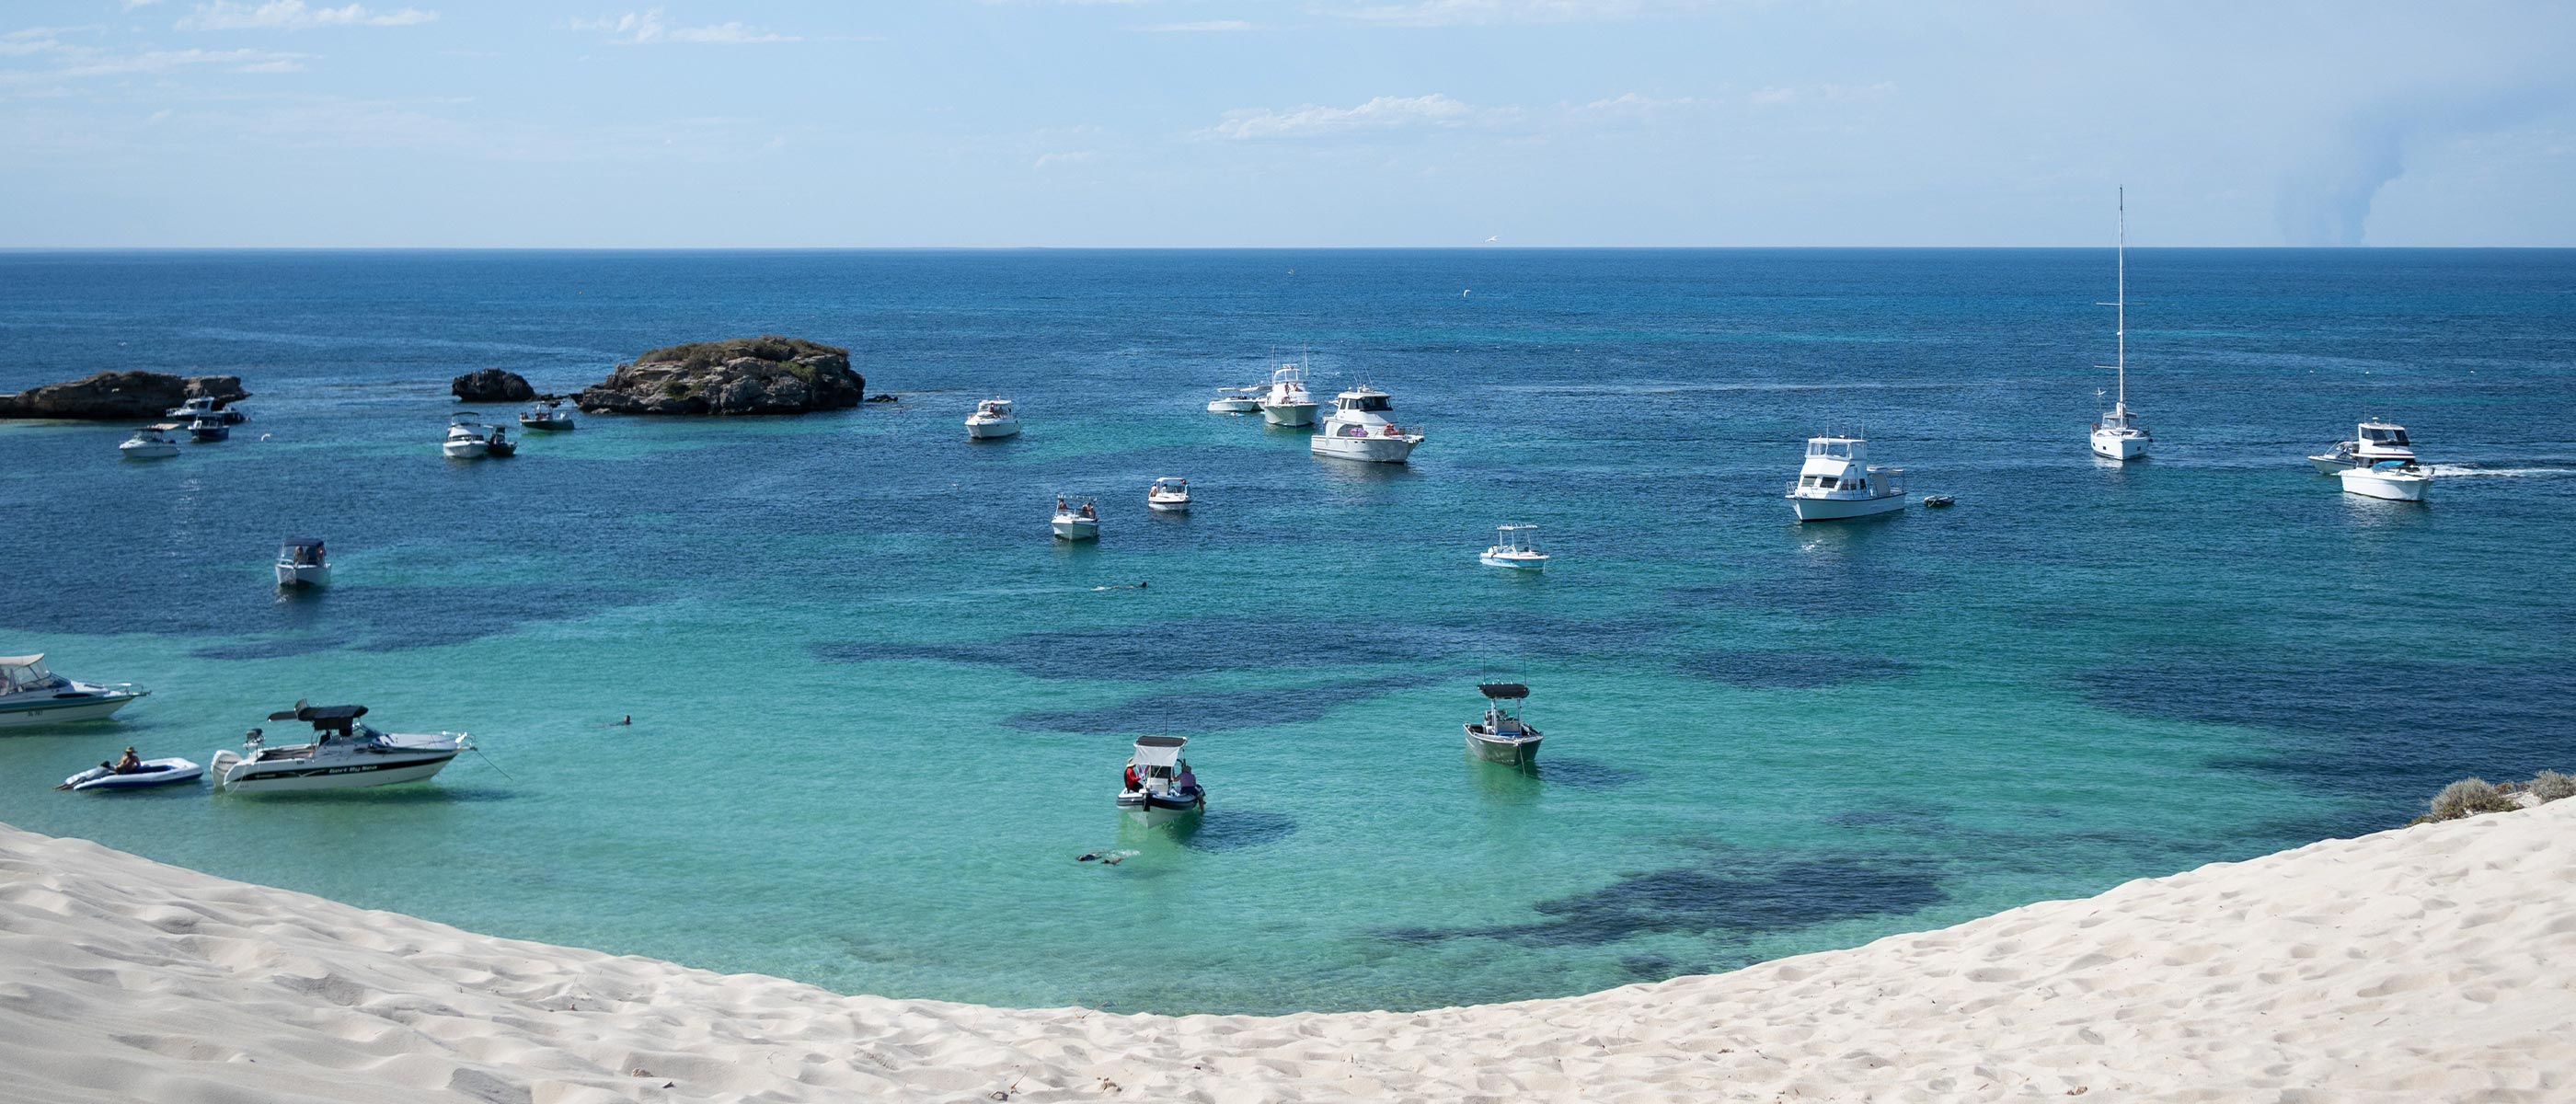 photo of a shoreline with boats on the shallow water, taken with the NIKKOR Z DX 24mm f/1.7